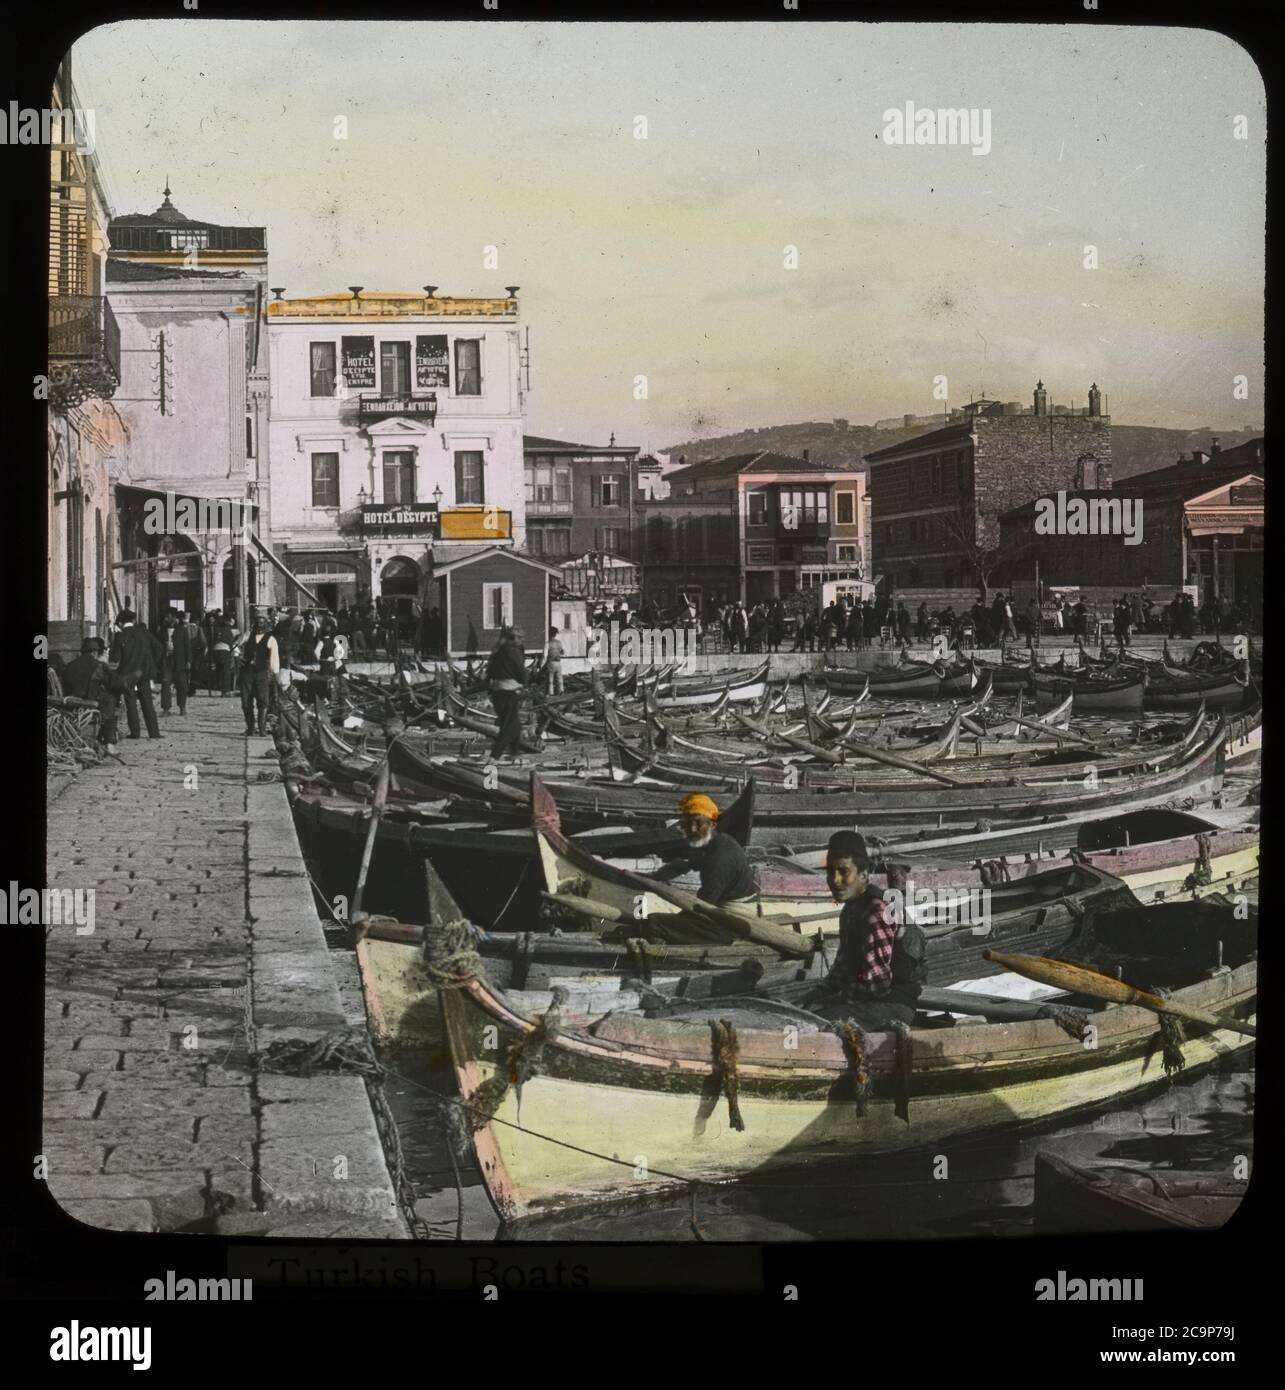 Port of Smyrna / Izmir, Turkey with docked rowboats. Hotel d'Egypte at the end of the mole. Hand-colored photograph on dry glass plate from the Herry W. Schaefer collection, around 1910. Stock Photo